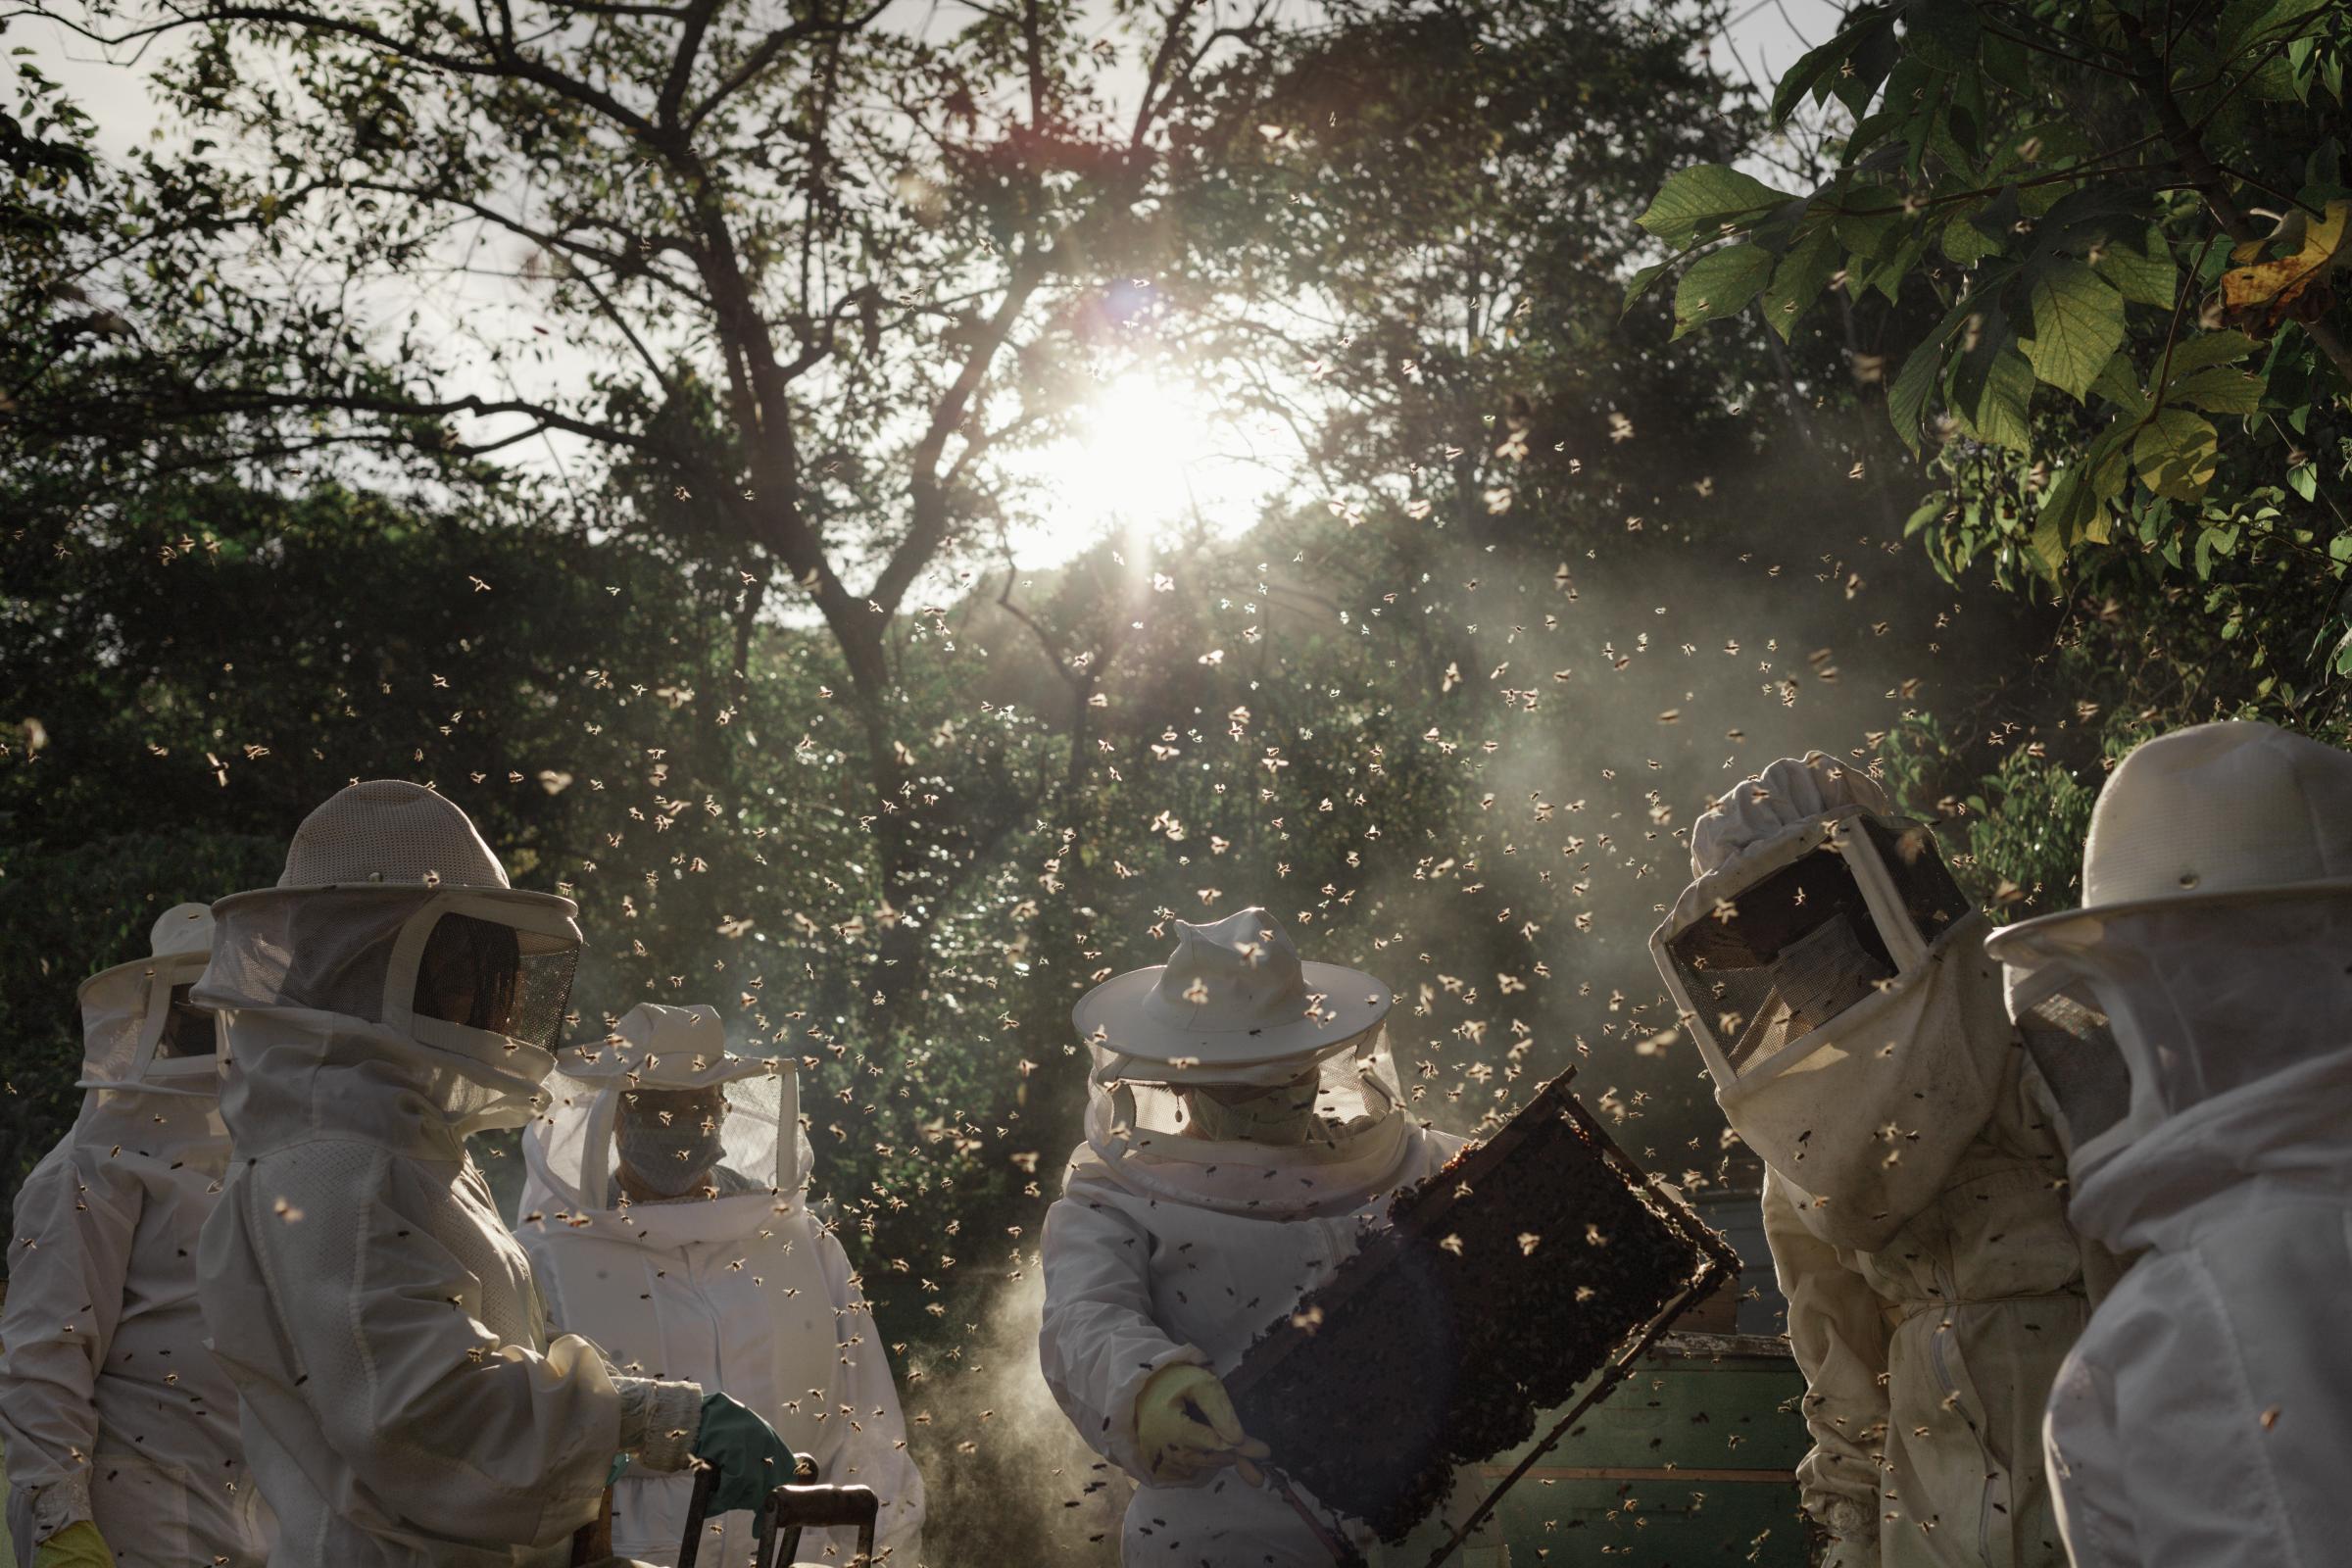 Beekeepers - Beekeepers and scientists gather at the Assentamento...